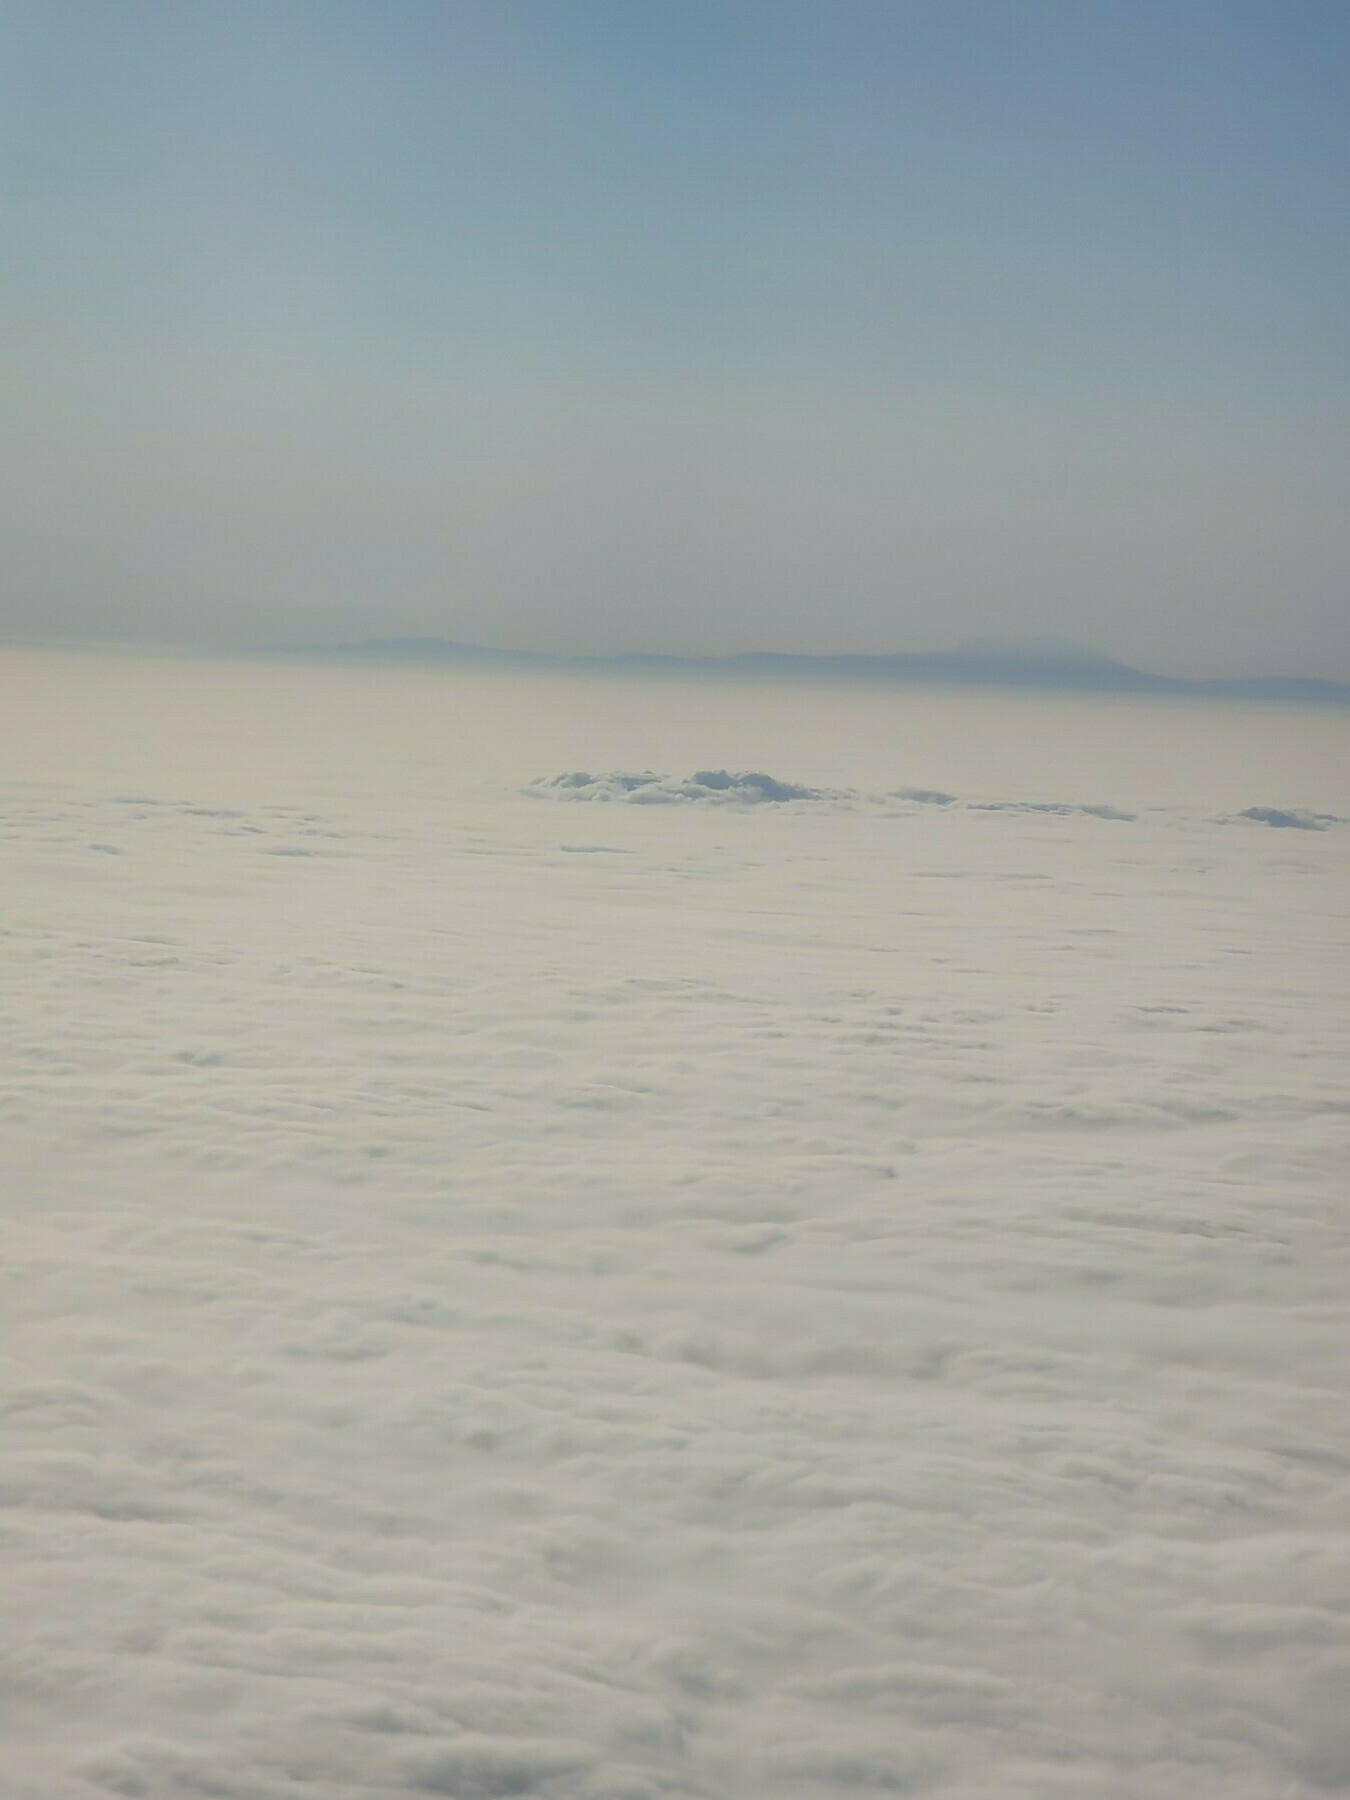 sea of clouds from an airplane window with mountains visible in the background